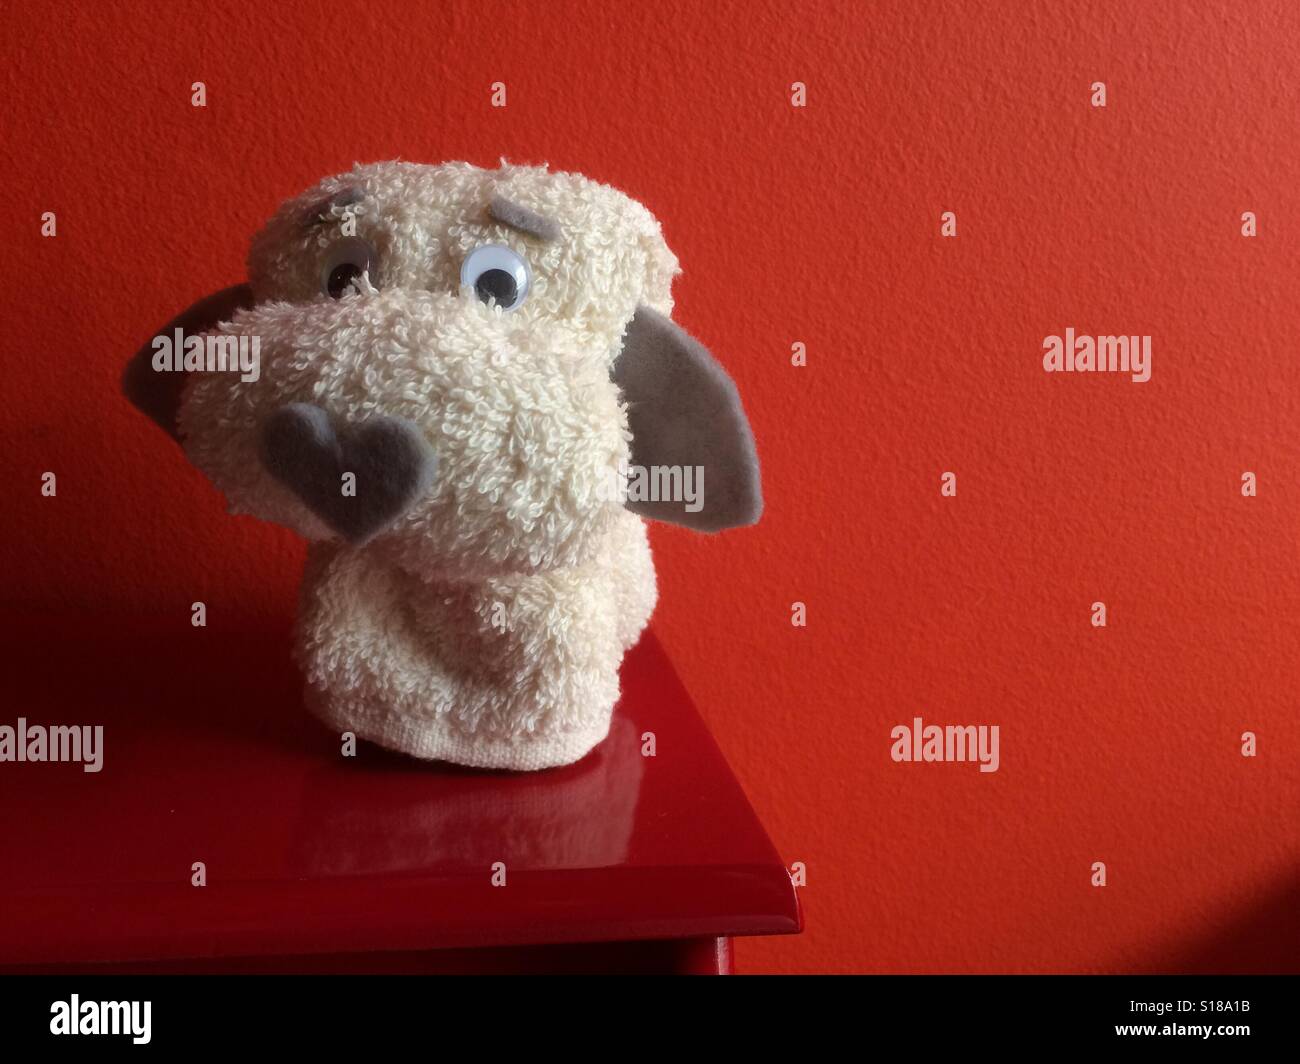 A toy dog made with a hand towel sitting atop a red surface and against a red background. Stock Photo